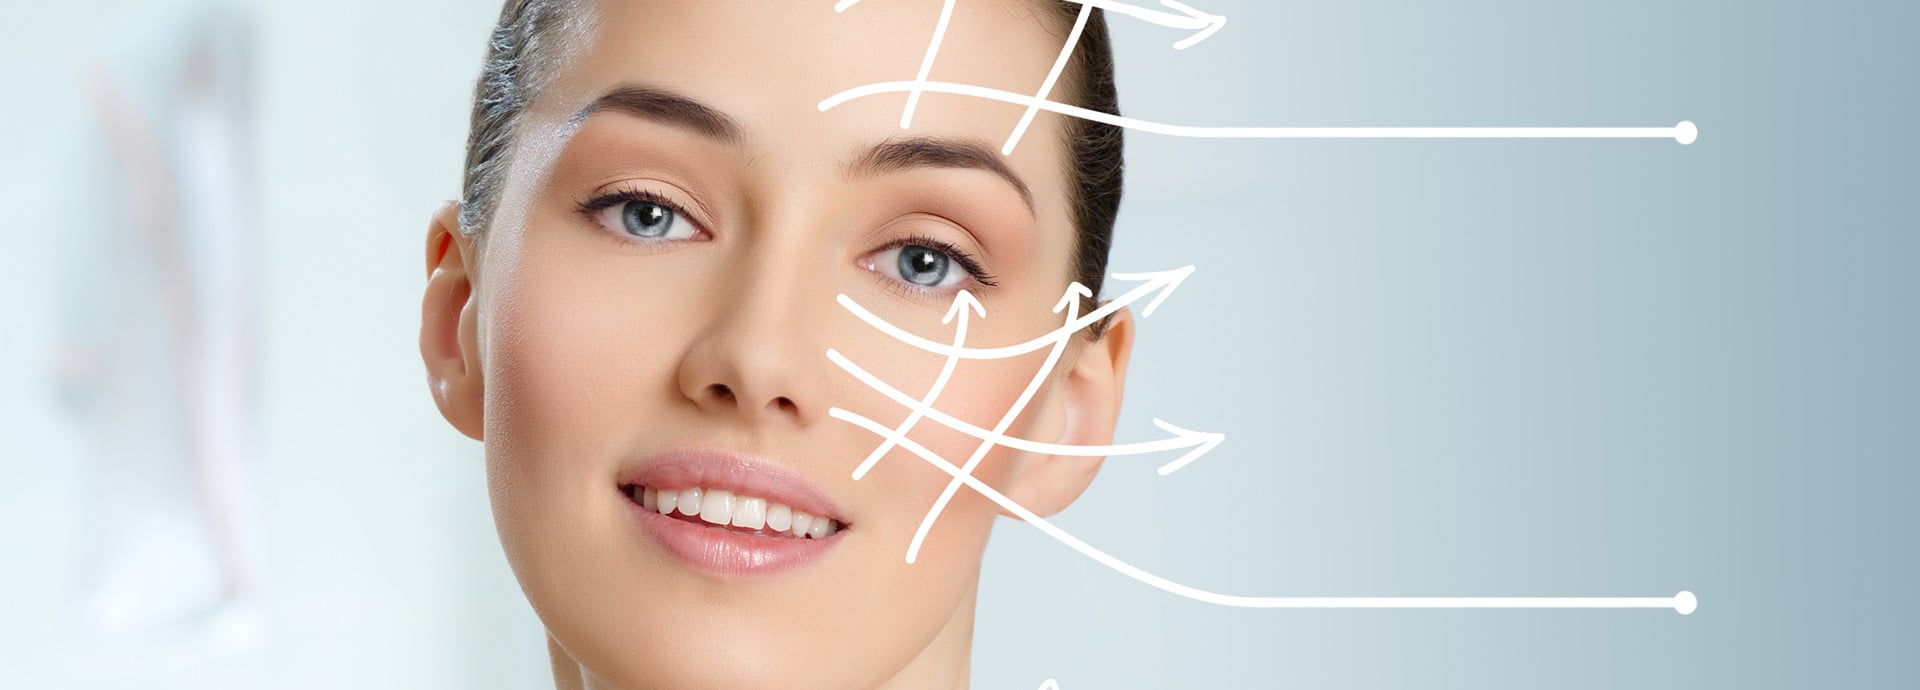 What sutures are better for the facelifting